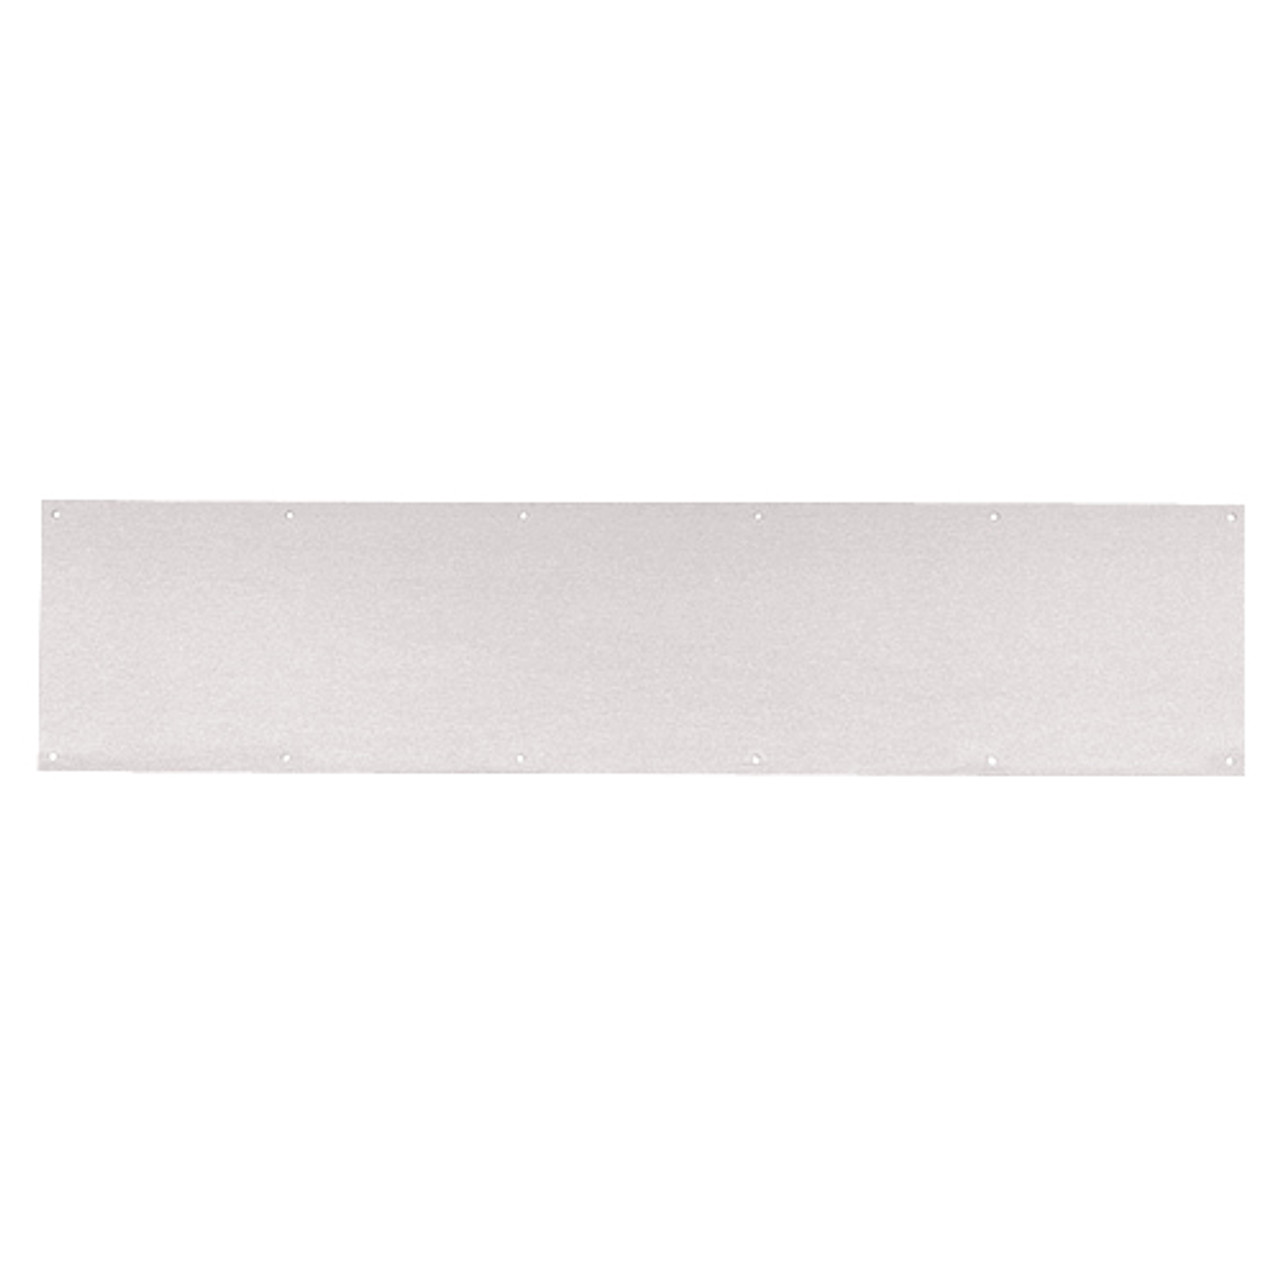 8400-US32-10x34-B-CS Ives 8400 Series Protection Plate in Bright Stainless Steel